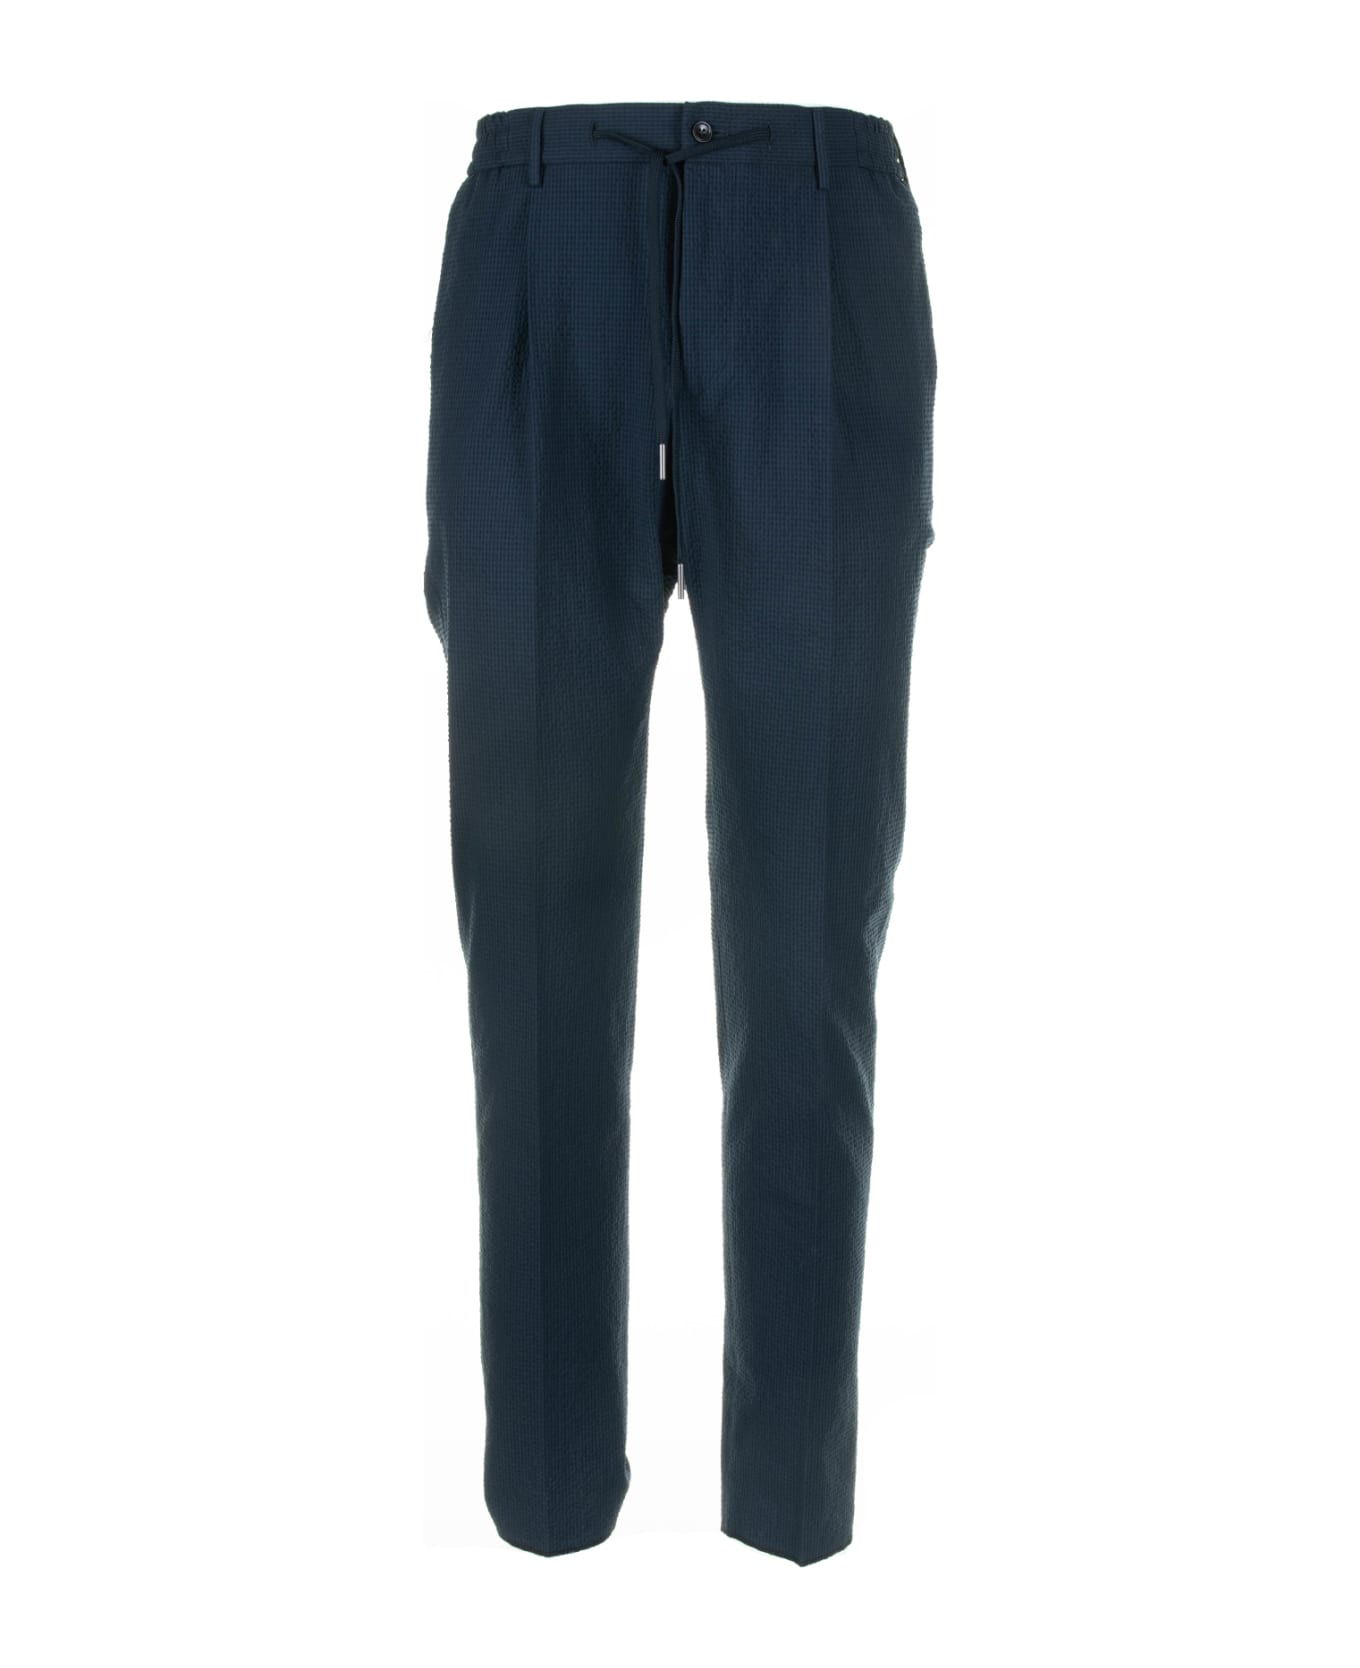 Tagliatore Navy Blue Trousers With Drawstring - AVION